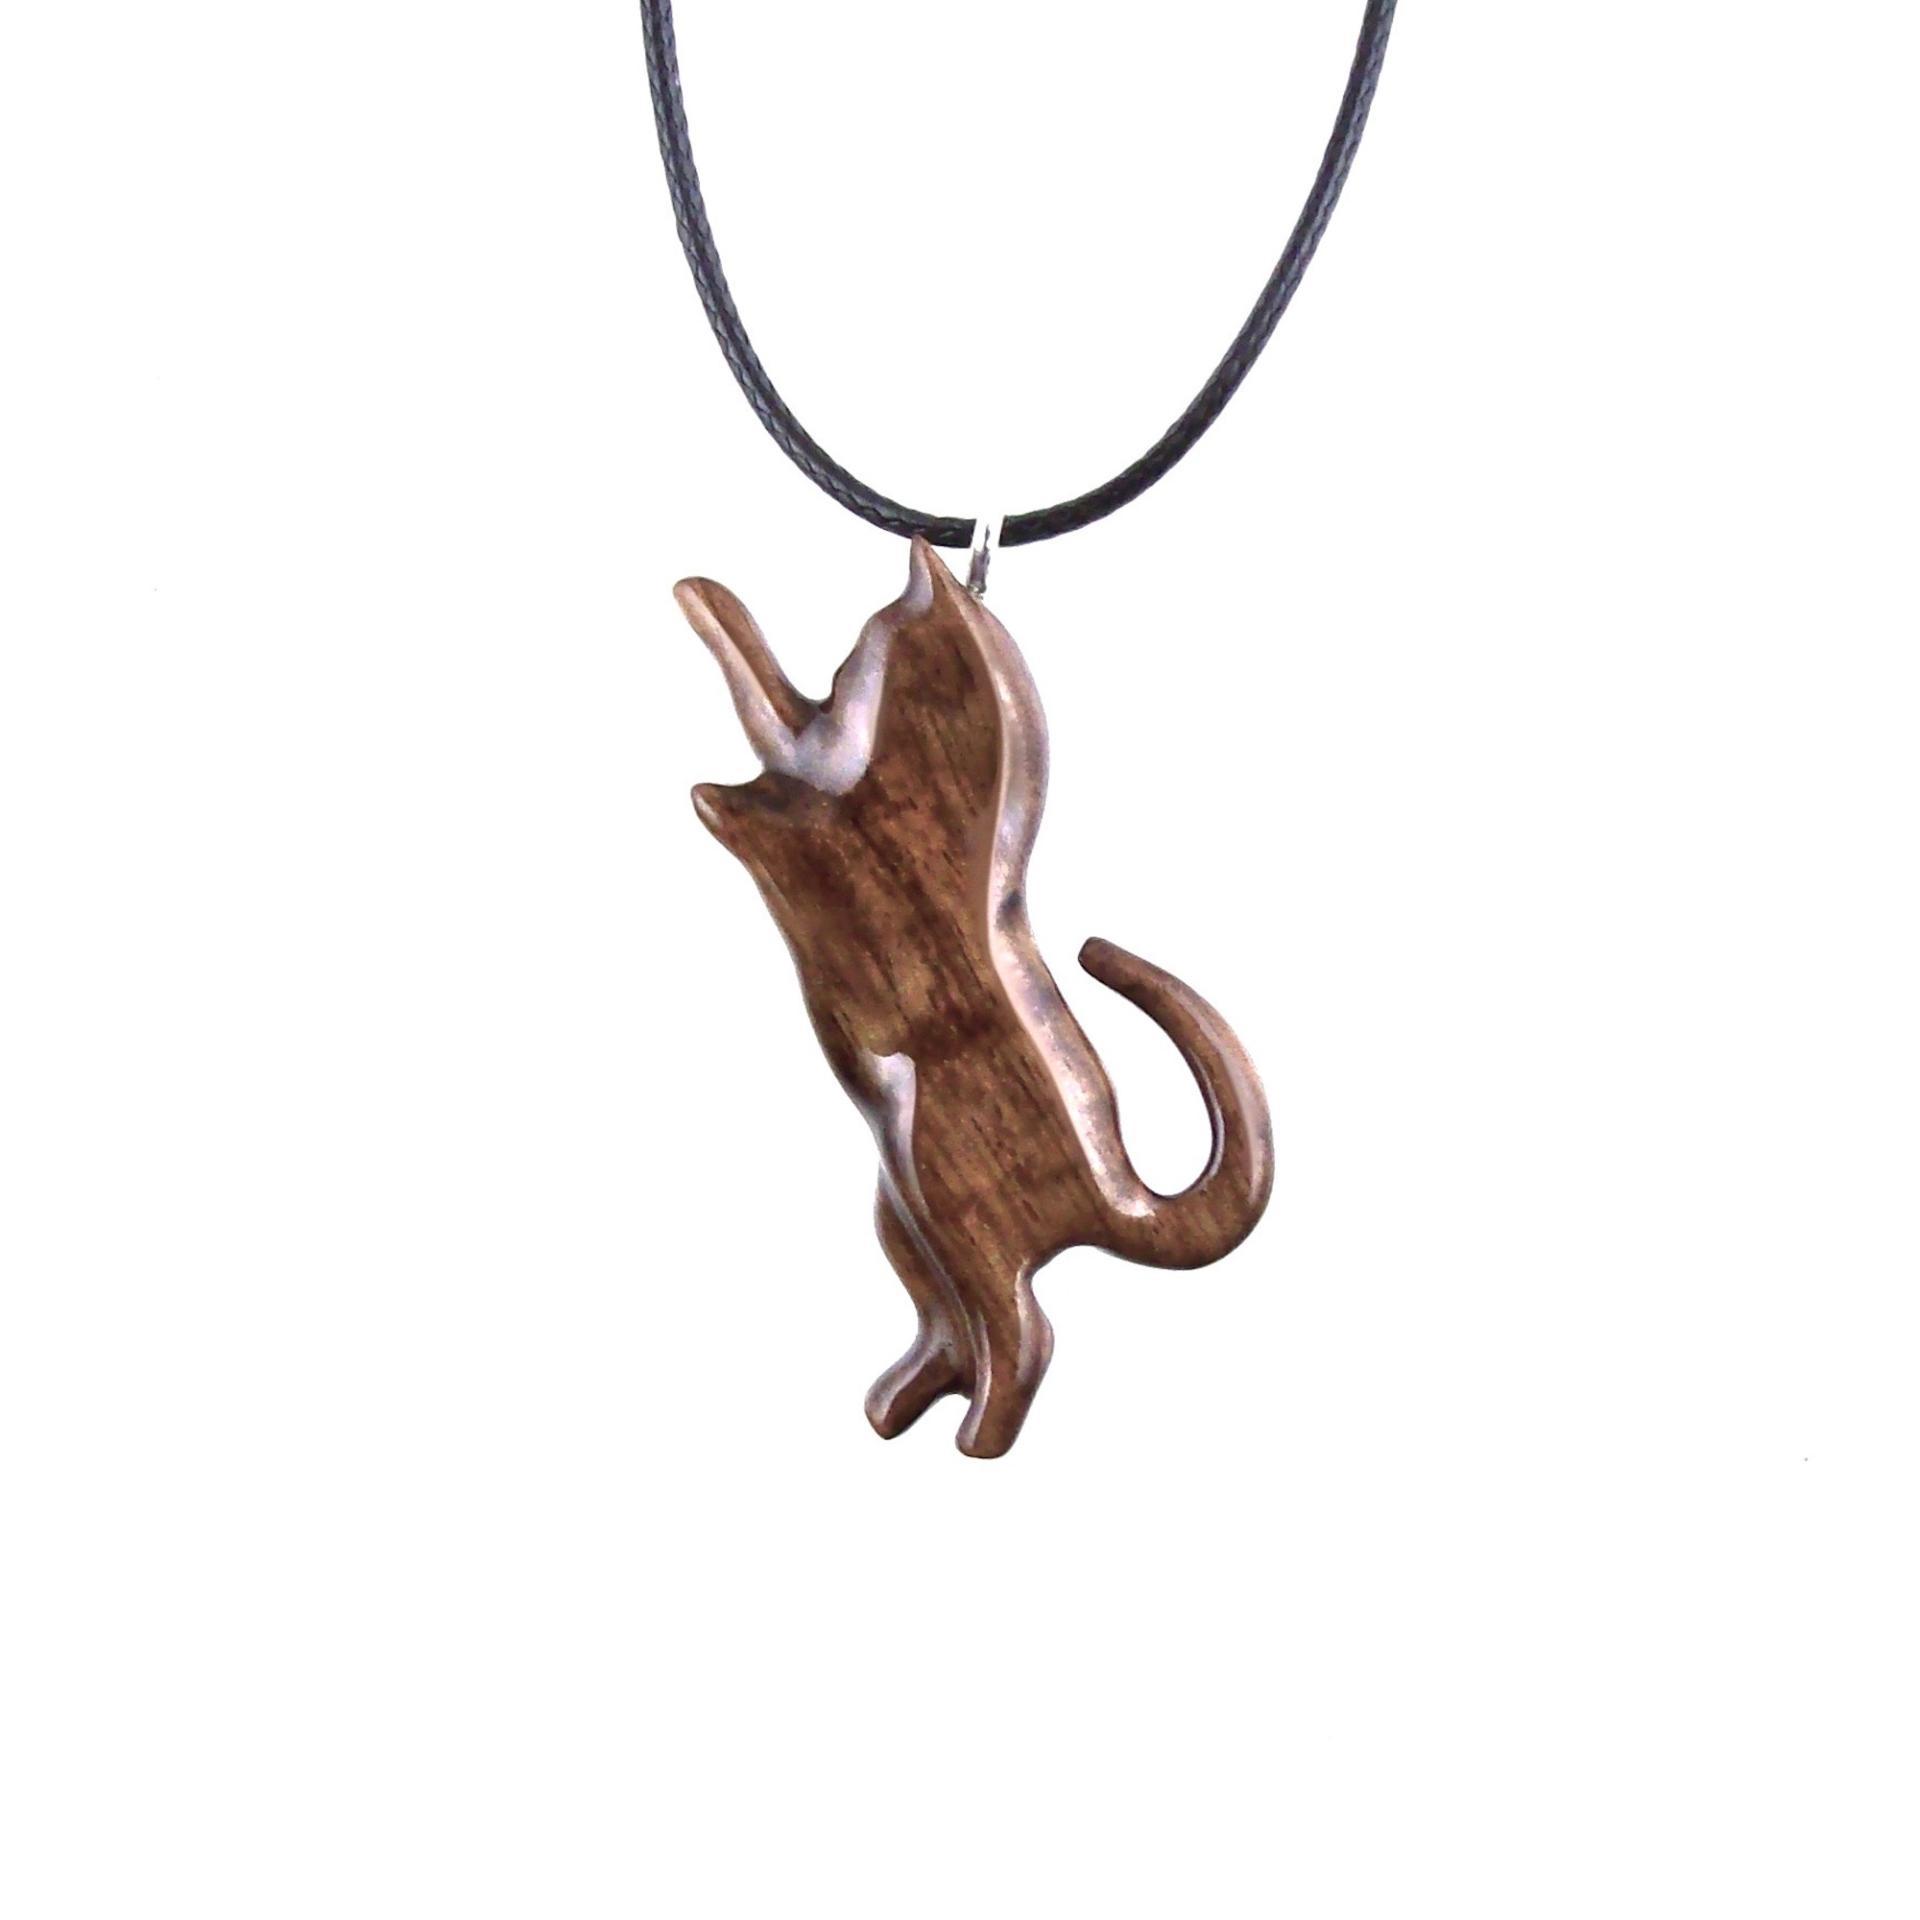 Kitten Necklace, Hand Carved Wooden Cat Pendant, Pet Animal Necklace, Handmade Wood Jewelry, One of a Kind Gift